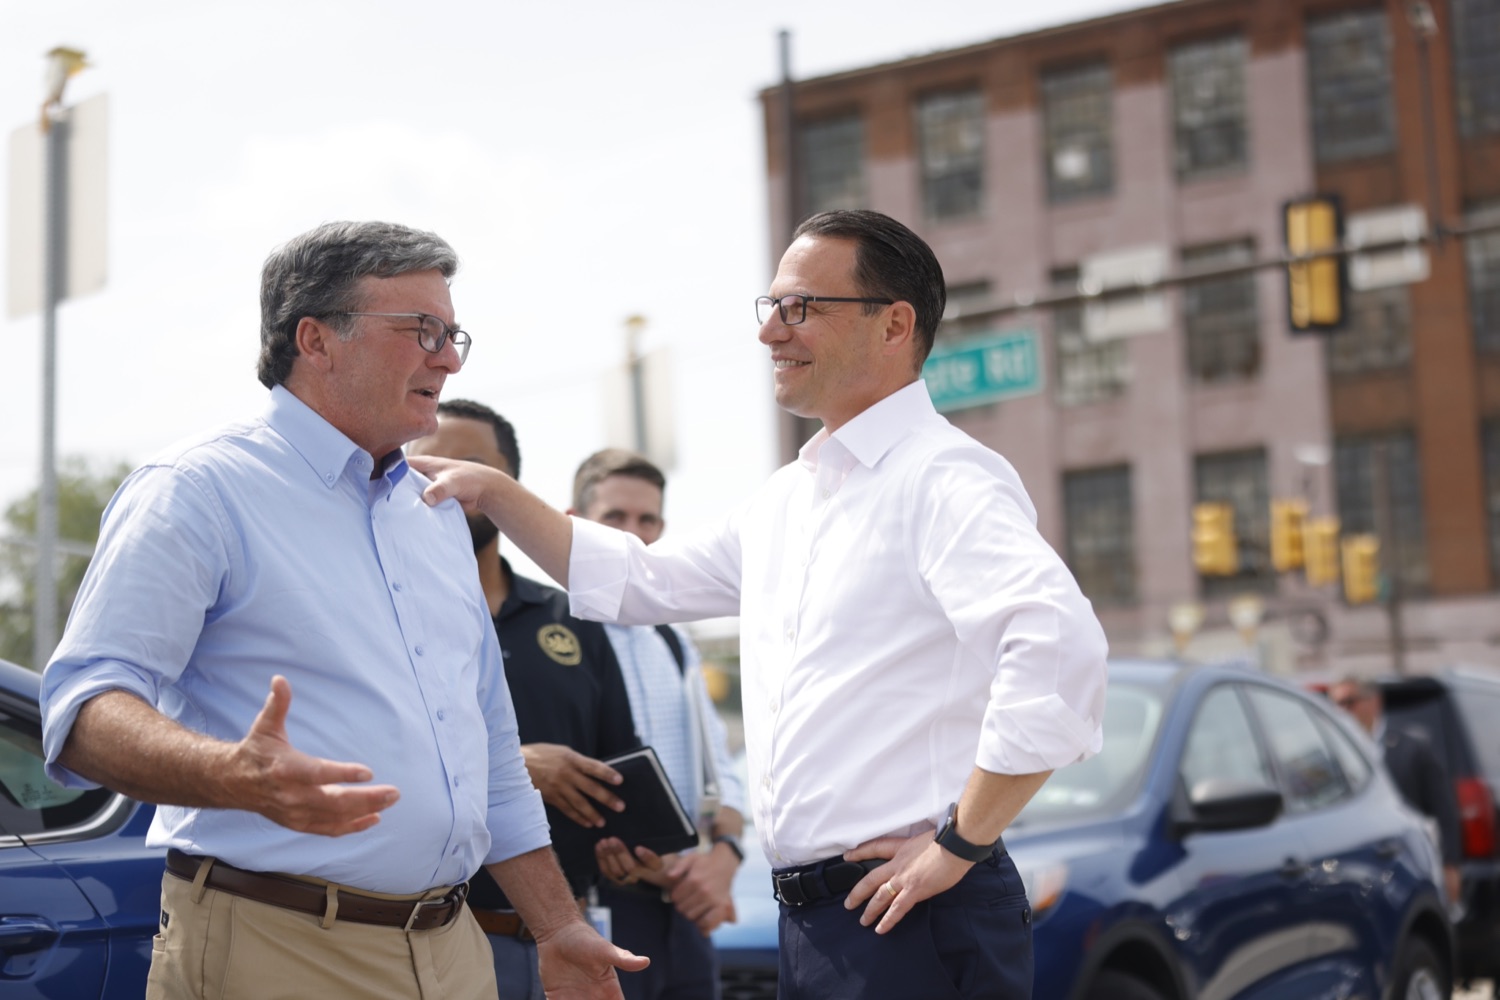 Governor Shapiro, PennDOT Secretary Carroll Announce I-95 Will Reopen This Weekend as the Shapiro Administrations Response Continues Ahead of Schedule<br><a href="https://filesource.amperwave.net/commonwealthofpa/photo/Image11.jpeg" target="_blank">⇣ Download Photo</a>